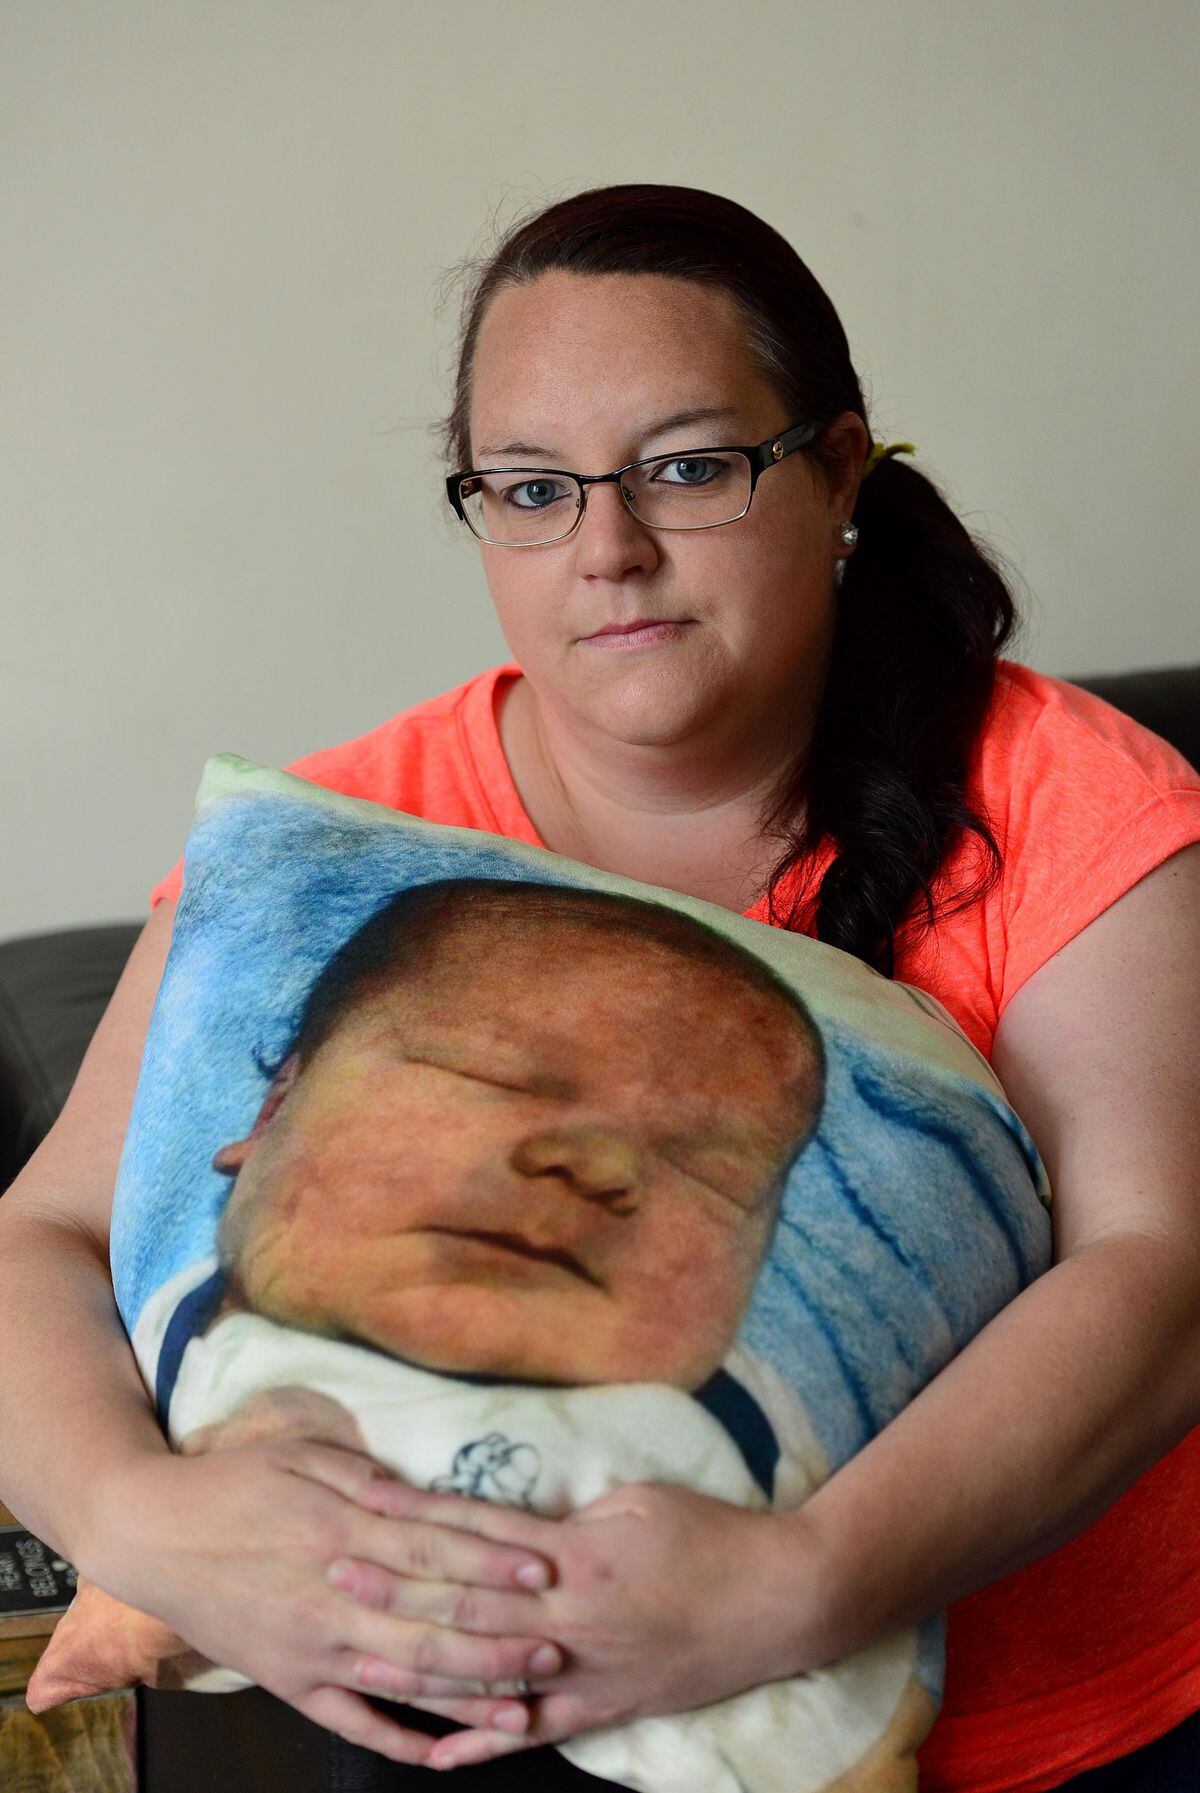 Hayley Matthews lost her baby Jack Burn 11 hours after birth in March 2015